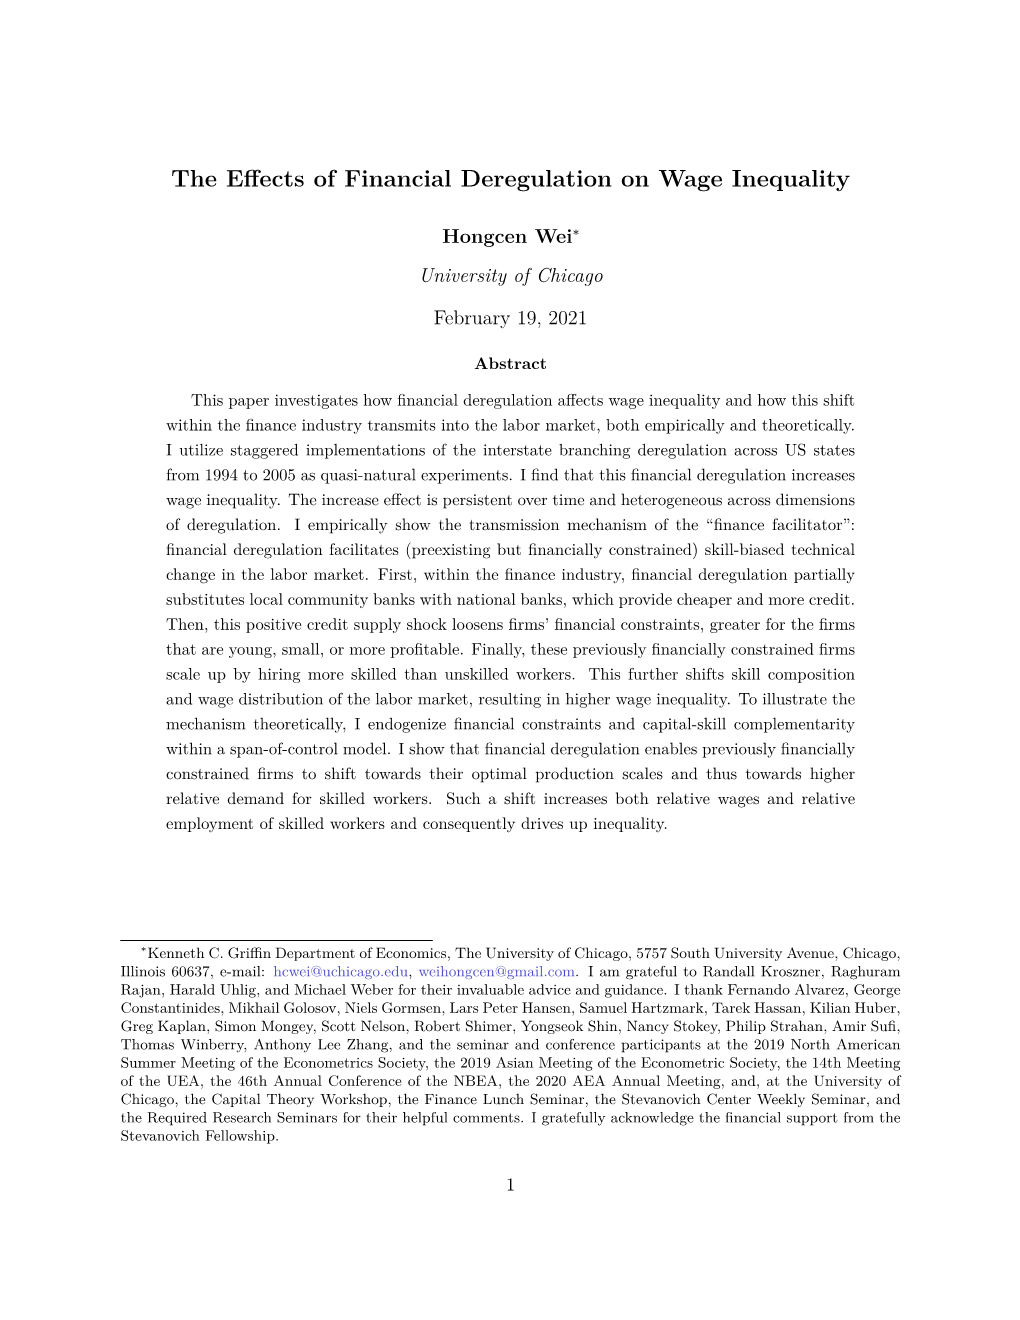 The Effects of Financial Deregulation on Wage Inequality